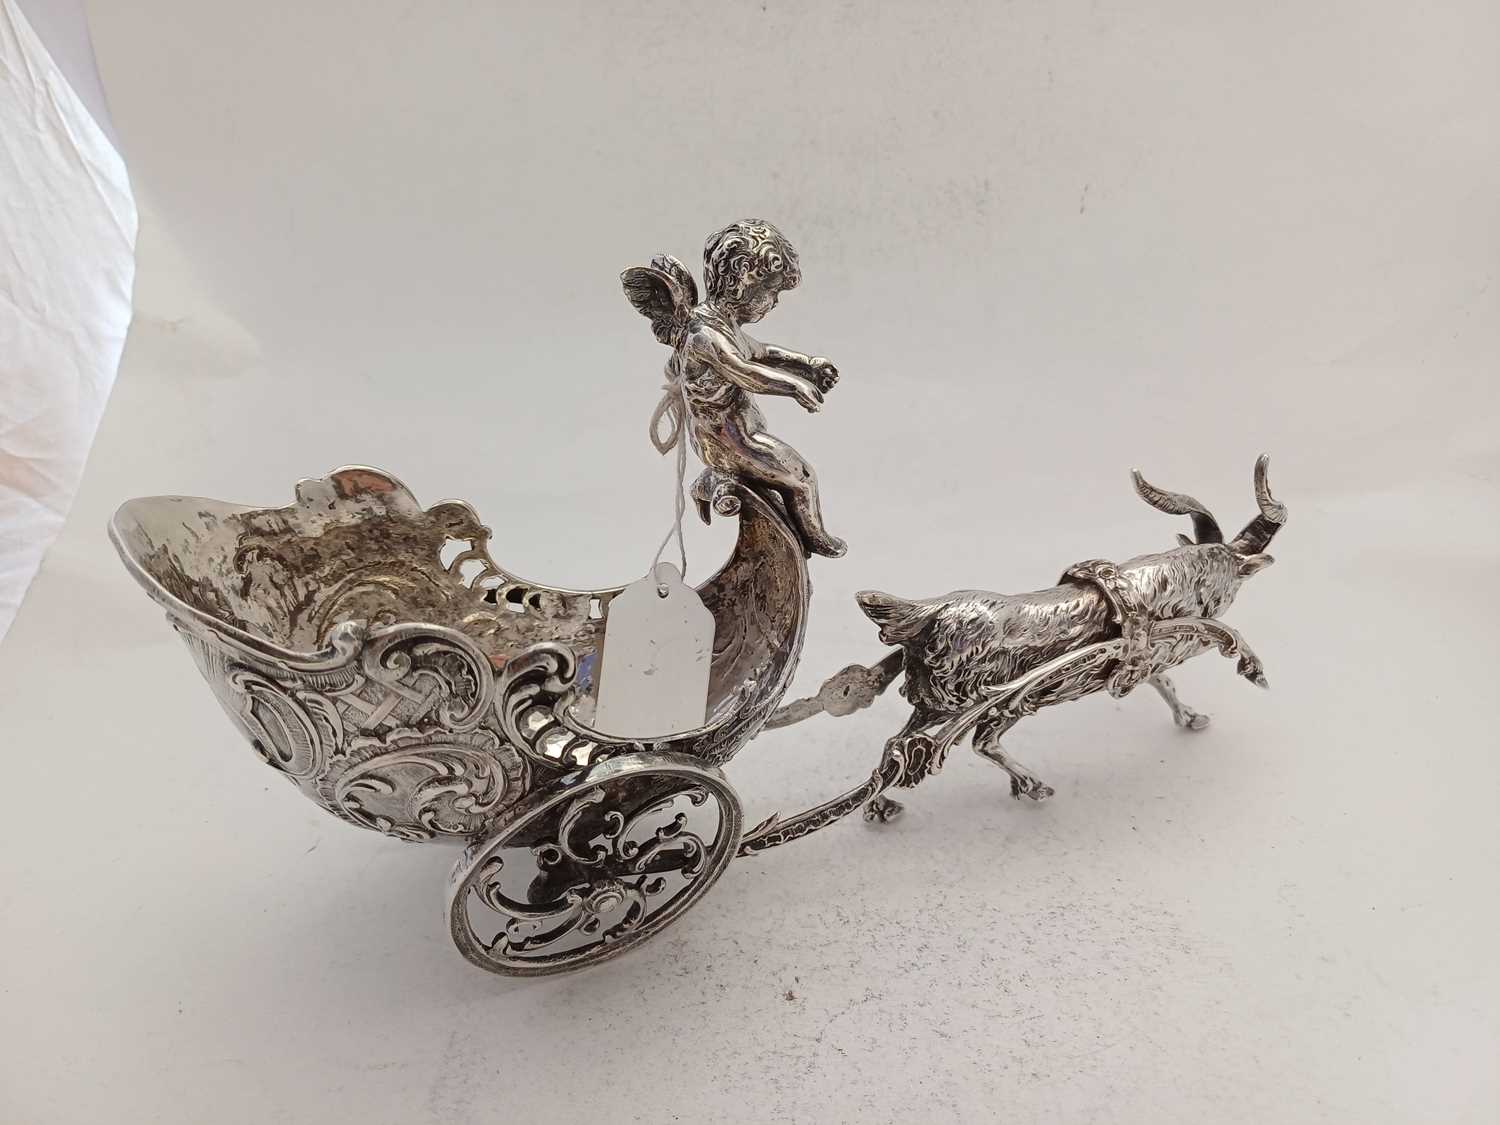 A German Silver Model of a Goat and Putto, by Neresheimer, Hanau, With English Import Marks for Ber - Image 2 of 9